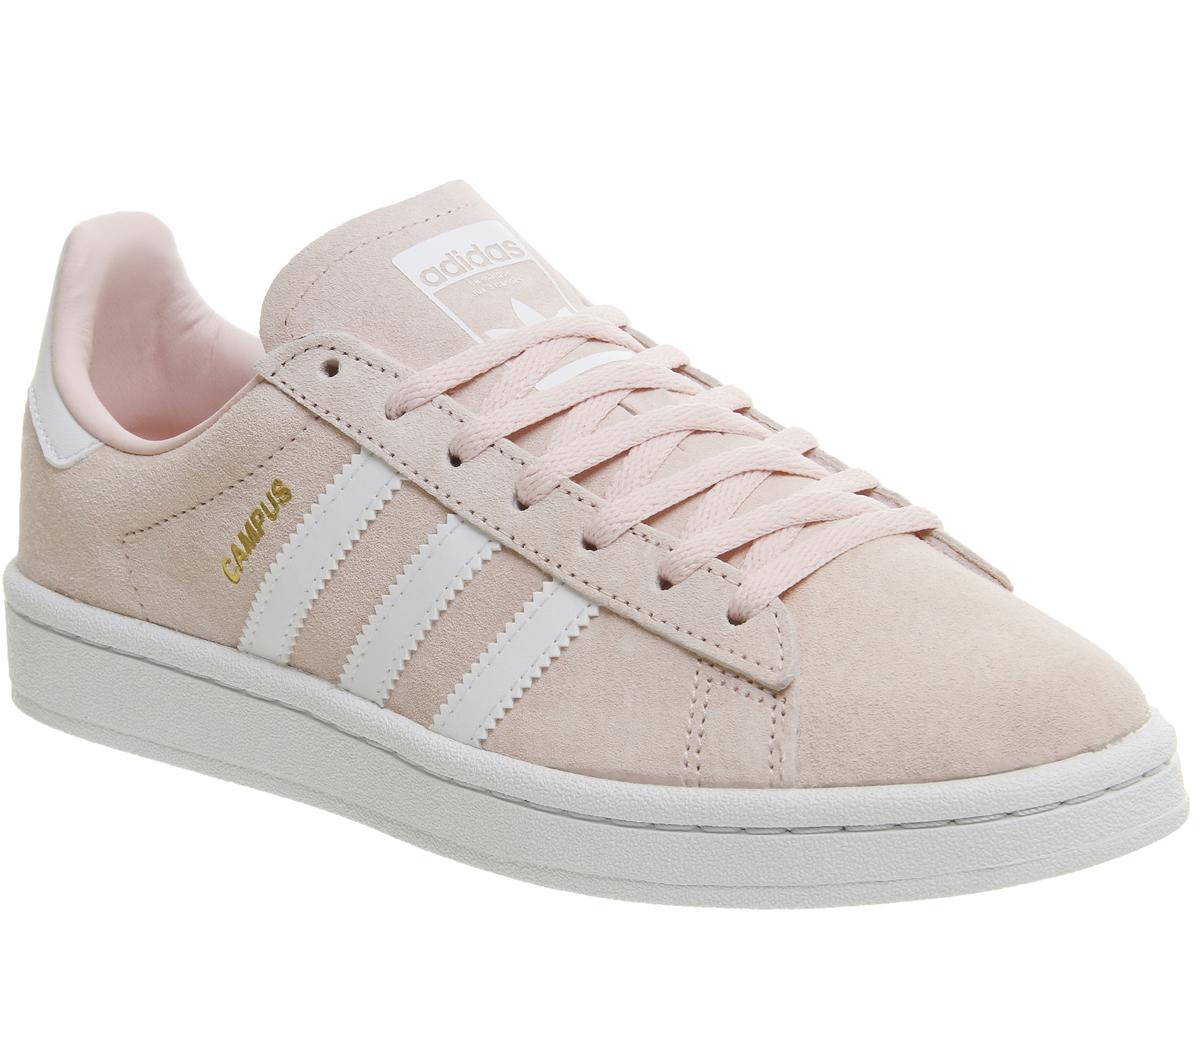 light pink adidas trainers - 62% OFF 